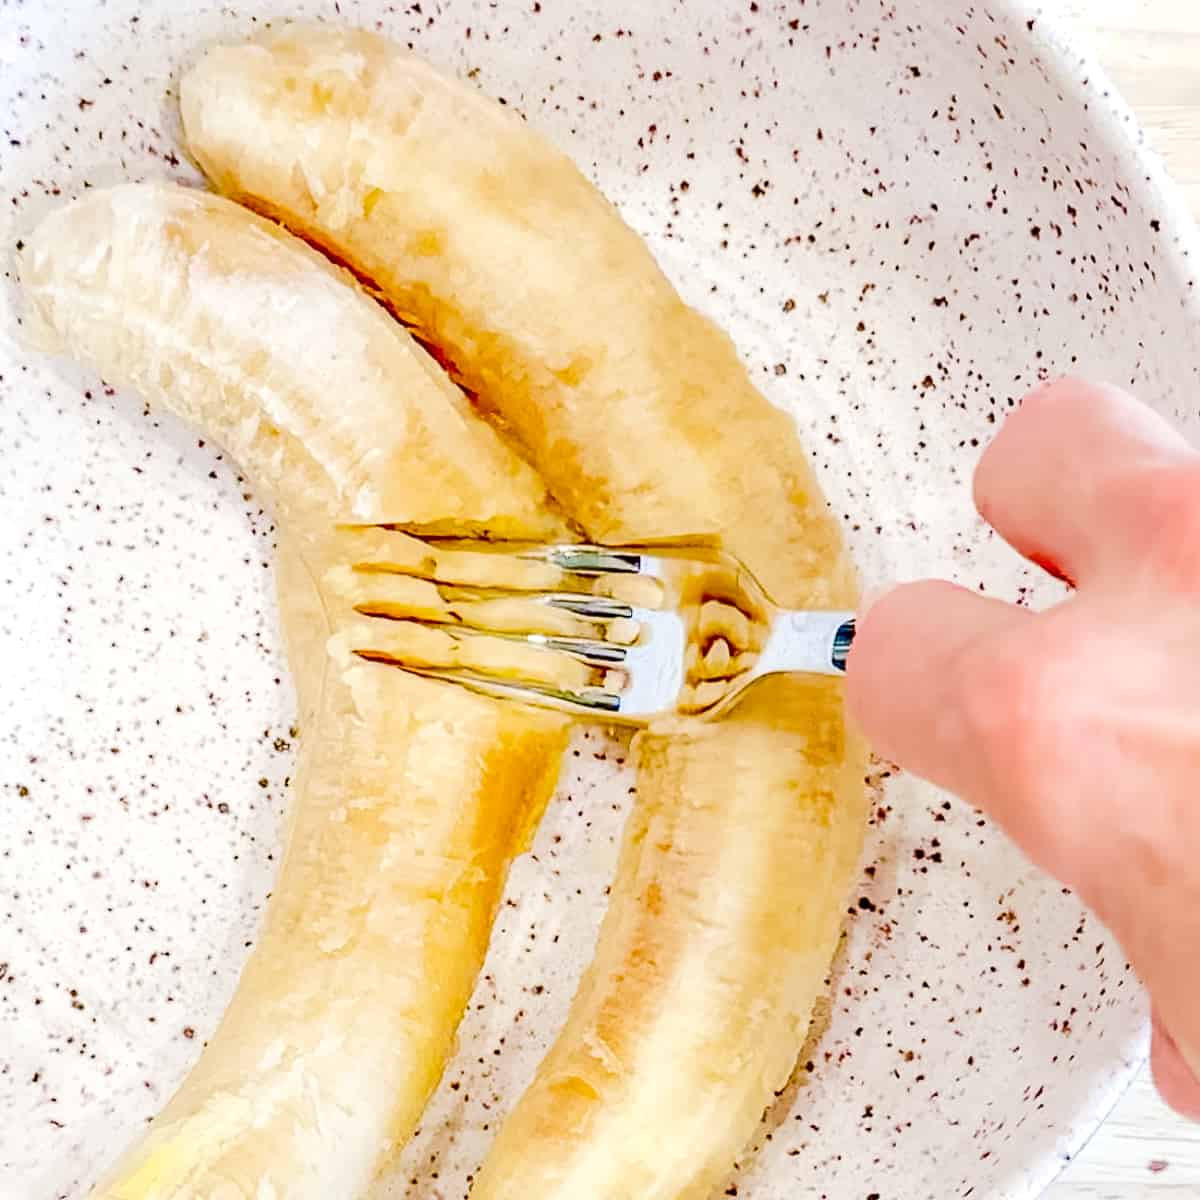 Mashing two bananas with a fork.